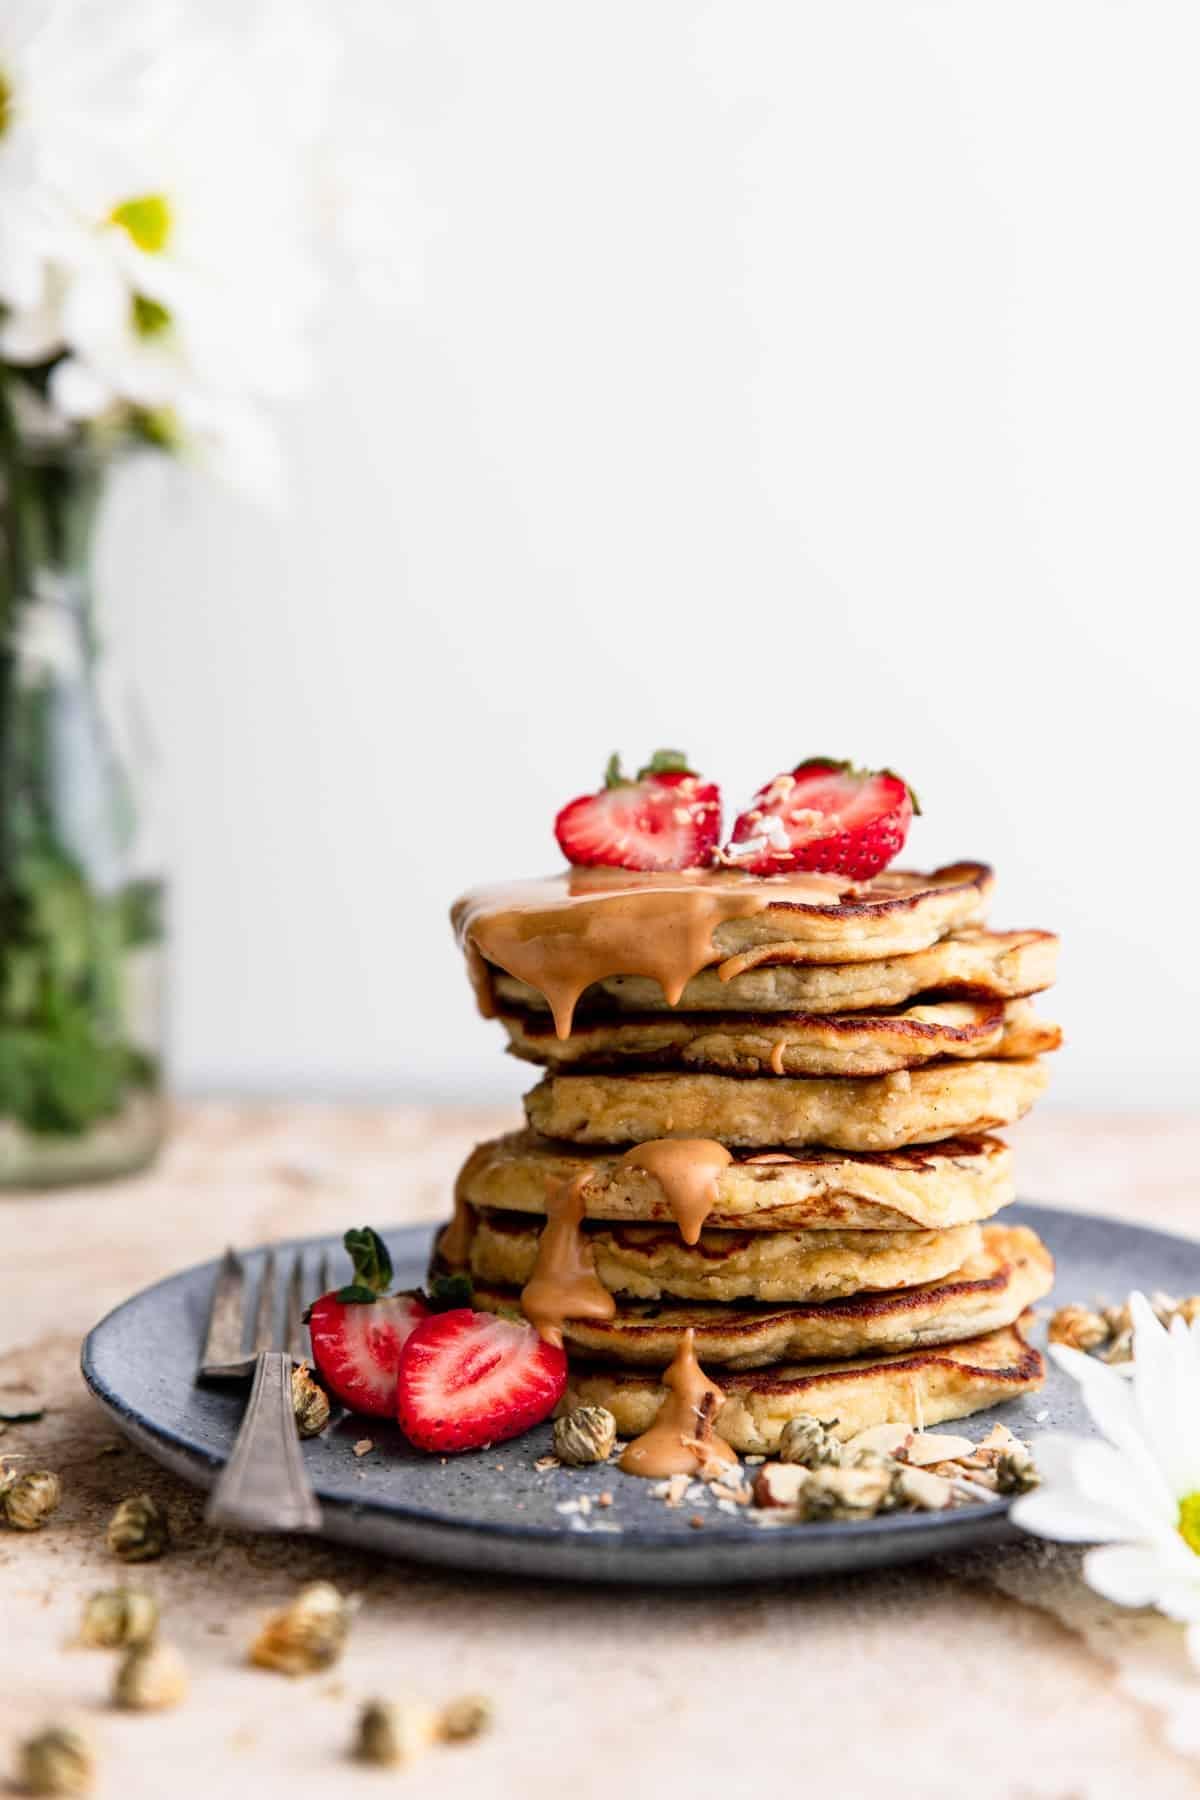 Whole30 Banana Pancakes with strawberries and drizzle on top